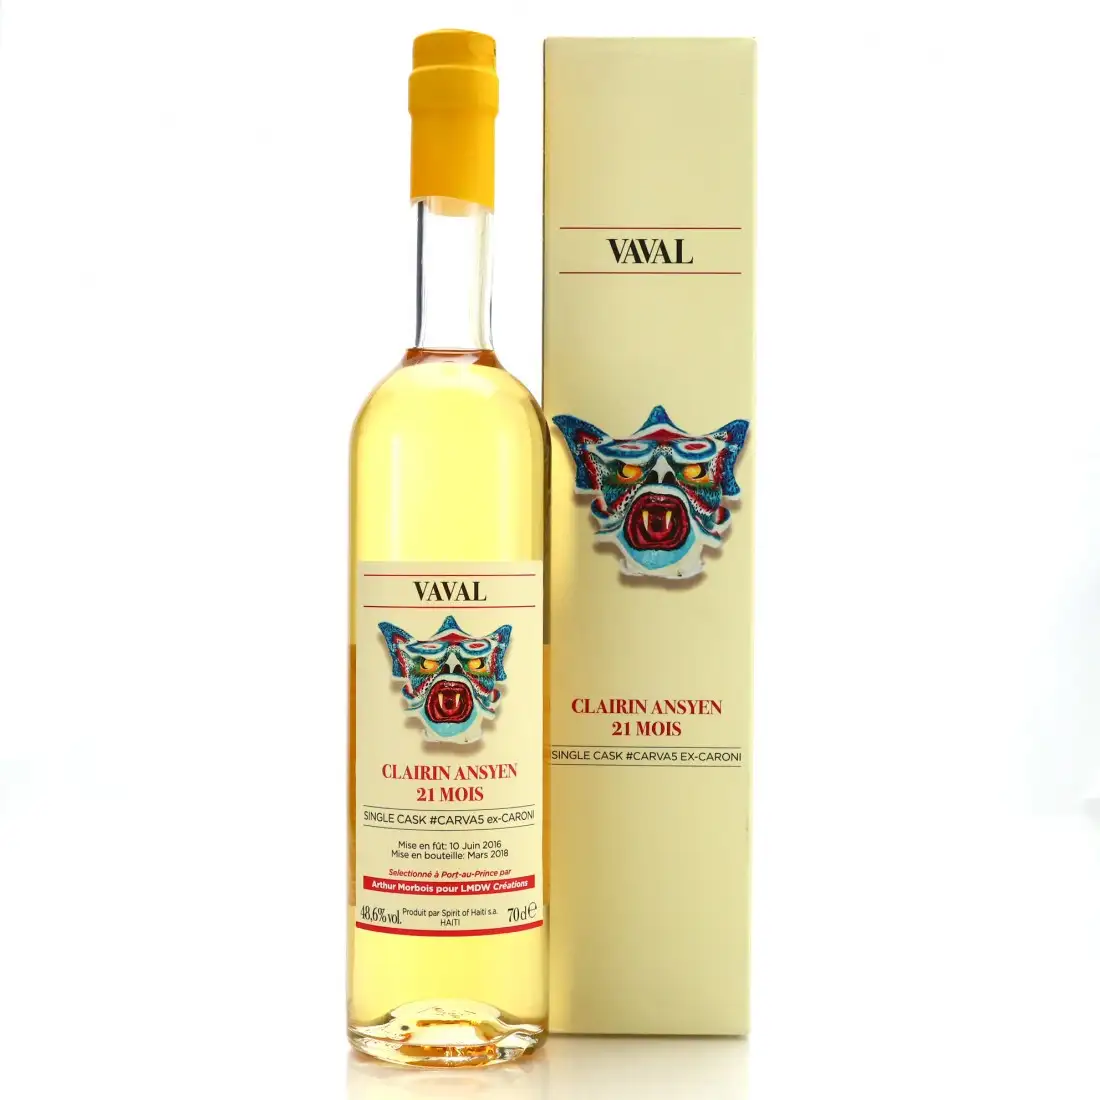 Image of the front of the bottle of the rum Clairin Ansyen Vaval